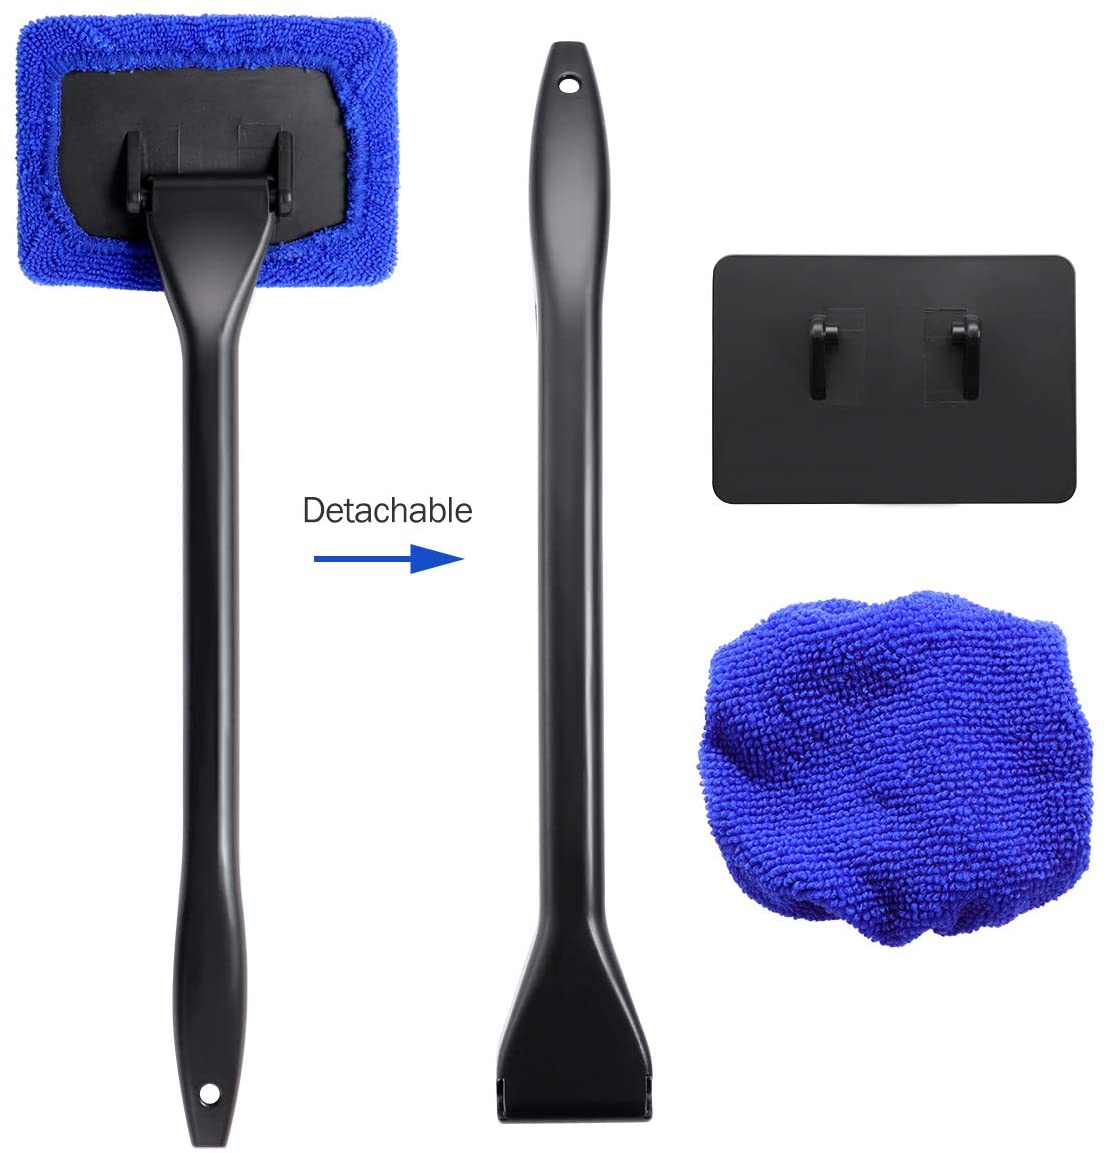 2pcs Car Windshield Cleaner Brush Auto Window Glass Cleaning Brush Tools with Long Handle